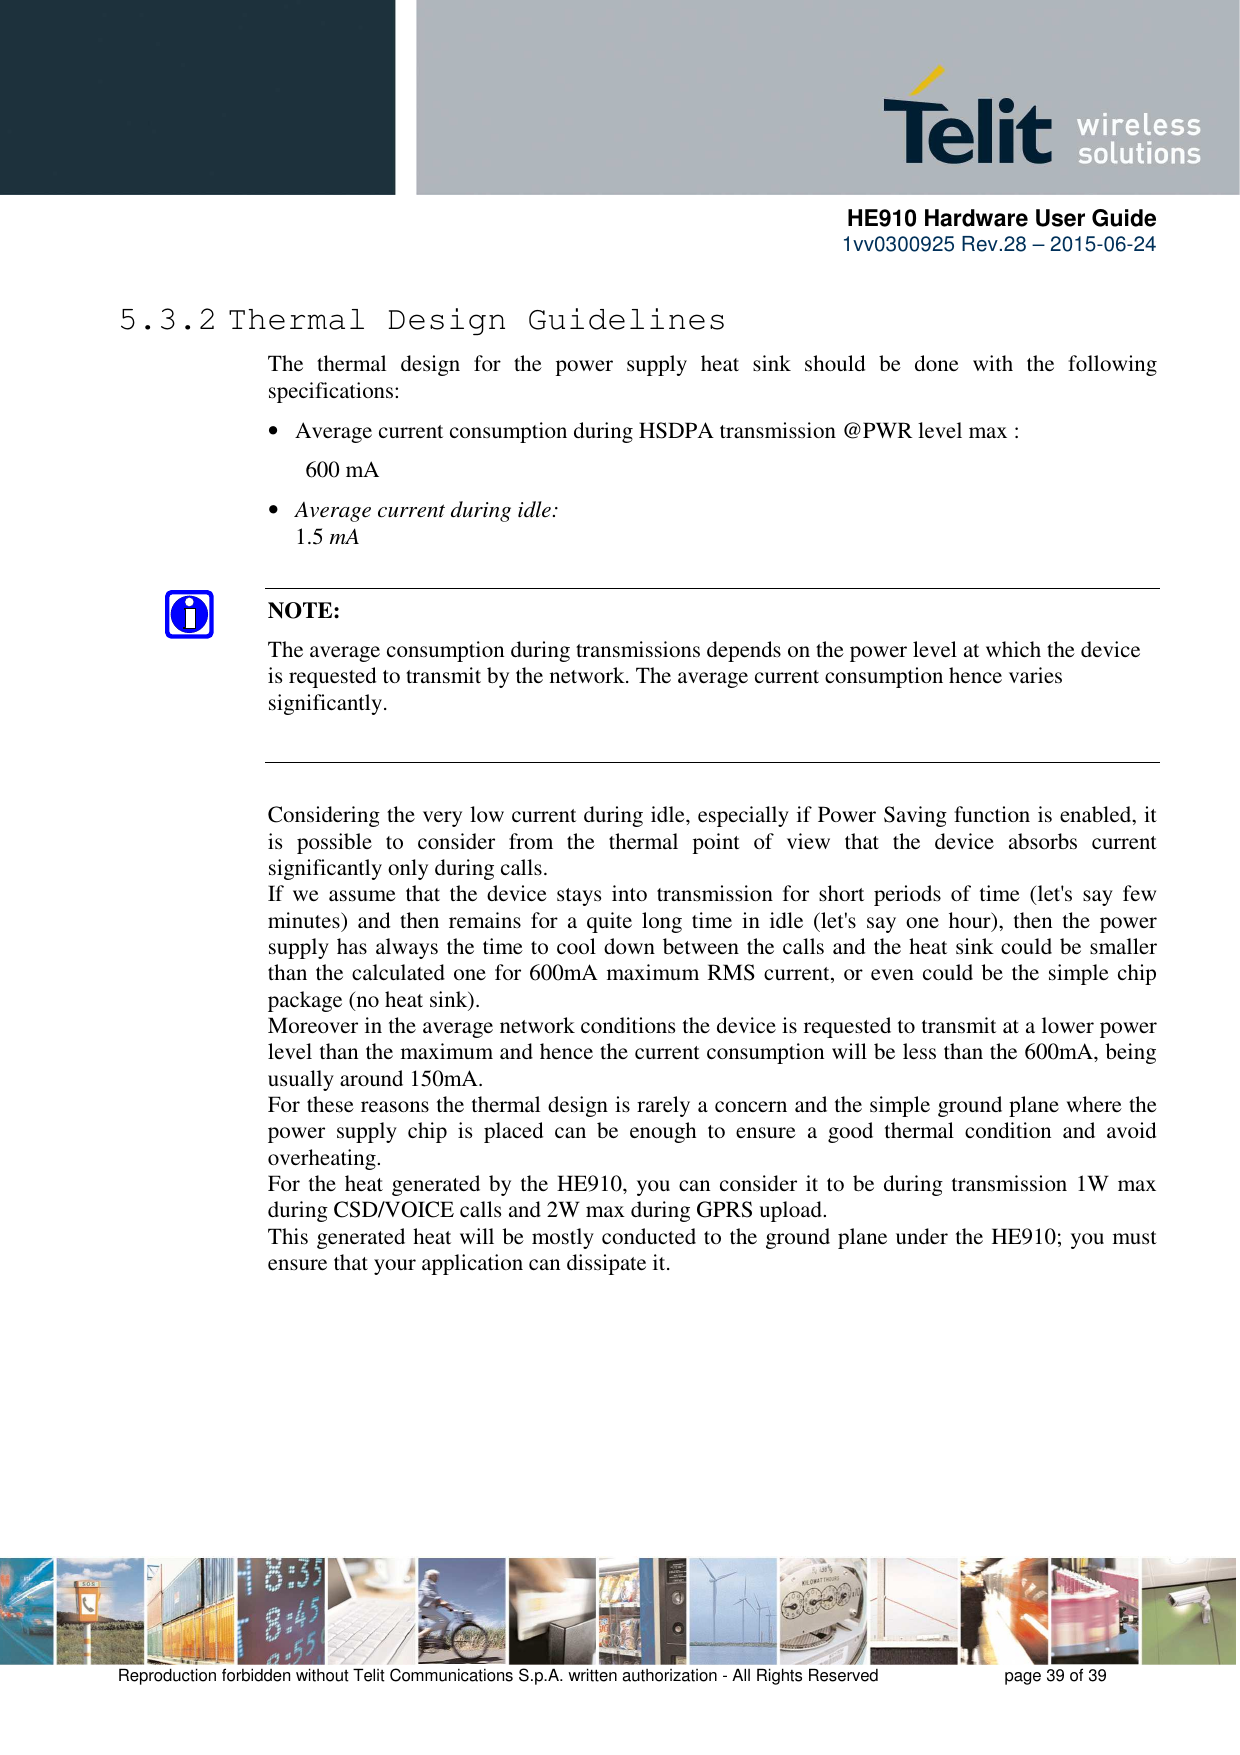      HE910 Hardware User Guide 1vv0300925 Rev.28 – 2015-06-24    Reproduction forbidden without Telit Communications S.p.A. written authorization - All Rights Reserved    page 39 of 39  5.3.2 Thermal Design Guidelines The  thermal  design  for  the  power  supply  heat  sink  should  be  done  with  the  following specifications: • Average current consumption during HSDPA transmission @PWR level max :   600 mA • Average current during idle:   1.5 mA  NOTE: The average consumption during transmissions depends on the power level at which the device is requested to transmit by the network. The average current consumption hence varies significantly.   Considering the very low current during idle, especially if Power Saving function is enabled, it is  possible  to  consider  from  the  thermal  point  of  view  that  the  device  absorbs  current significantly only during calls.  If we  assume  that  the  device  stays  into  transmission for  short  periods of  time  (let&apos;s say  few minutes)  and  then  remains  for  a  quite  long time  in  idle  (let&apos;s  say  one  hour),  then  the  power supply has always the time to cool down between the calls and the heat sink could be smaller than the calculated one for 600mA maximum RMS current, or even could be the simple chip package (no heat sink). Moreover in the average network conditions the device is requested to transmit at a lower power level than the maximum and hence the current consumption will be less than the 600mA, being usually around 150mA. For these reasons the thermal design is rarely a concern and the simple ground plane where the power  supply  chip  is  placed  can  be  enough  to  ensure  a  good  thermal  condition  and  avoid overheating.  For the heat generated by the HE910, you can consider it to be during transmission 1W max during CSD/VOICE calls and 2W max during GPRS upload.  This generated heat will be mostly conducted to the ground plane under the HE910; you must ensure that your application can dissipate it.   